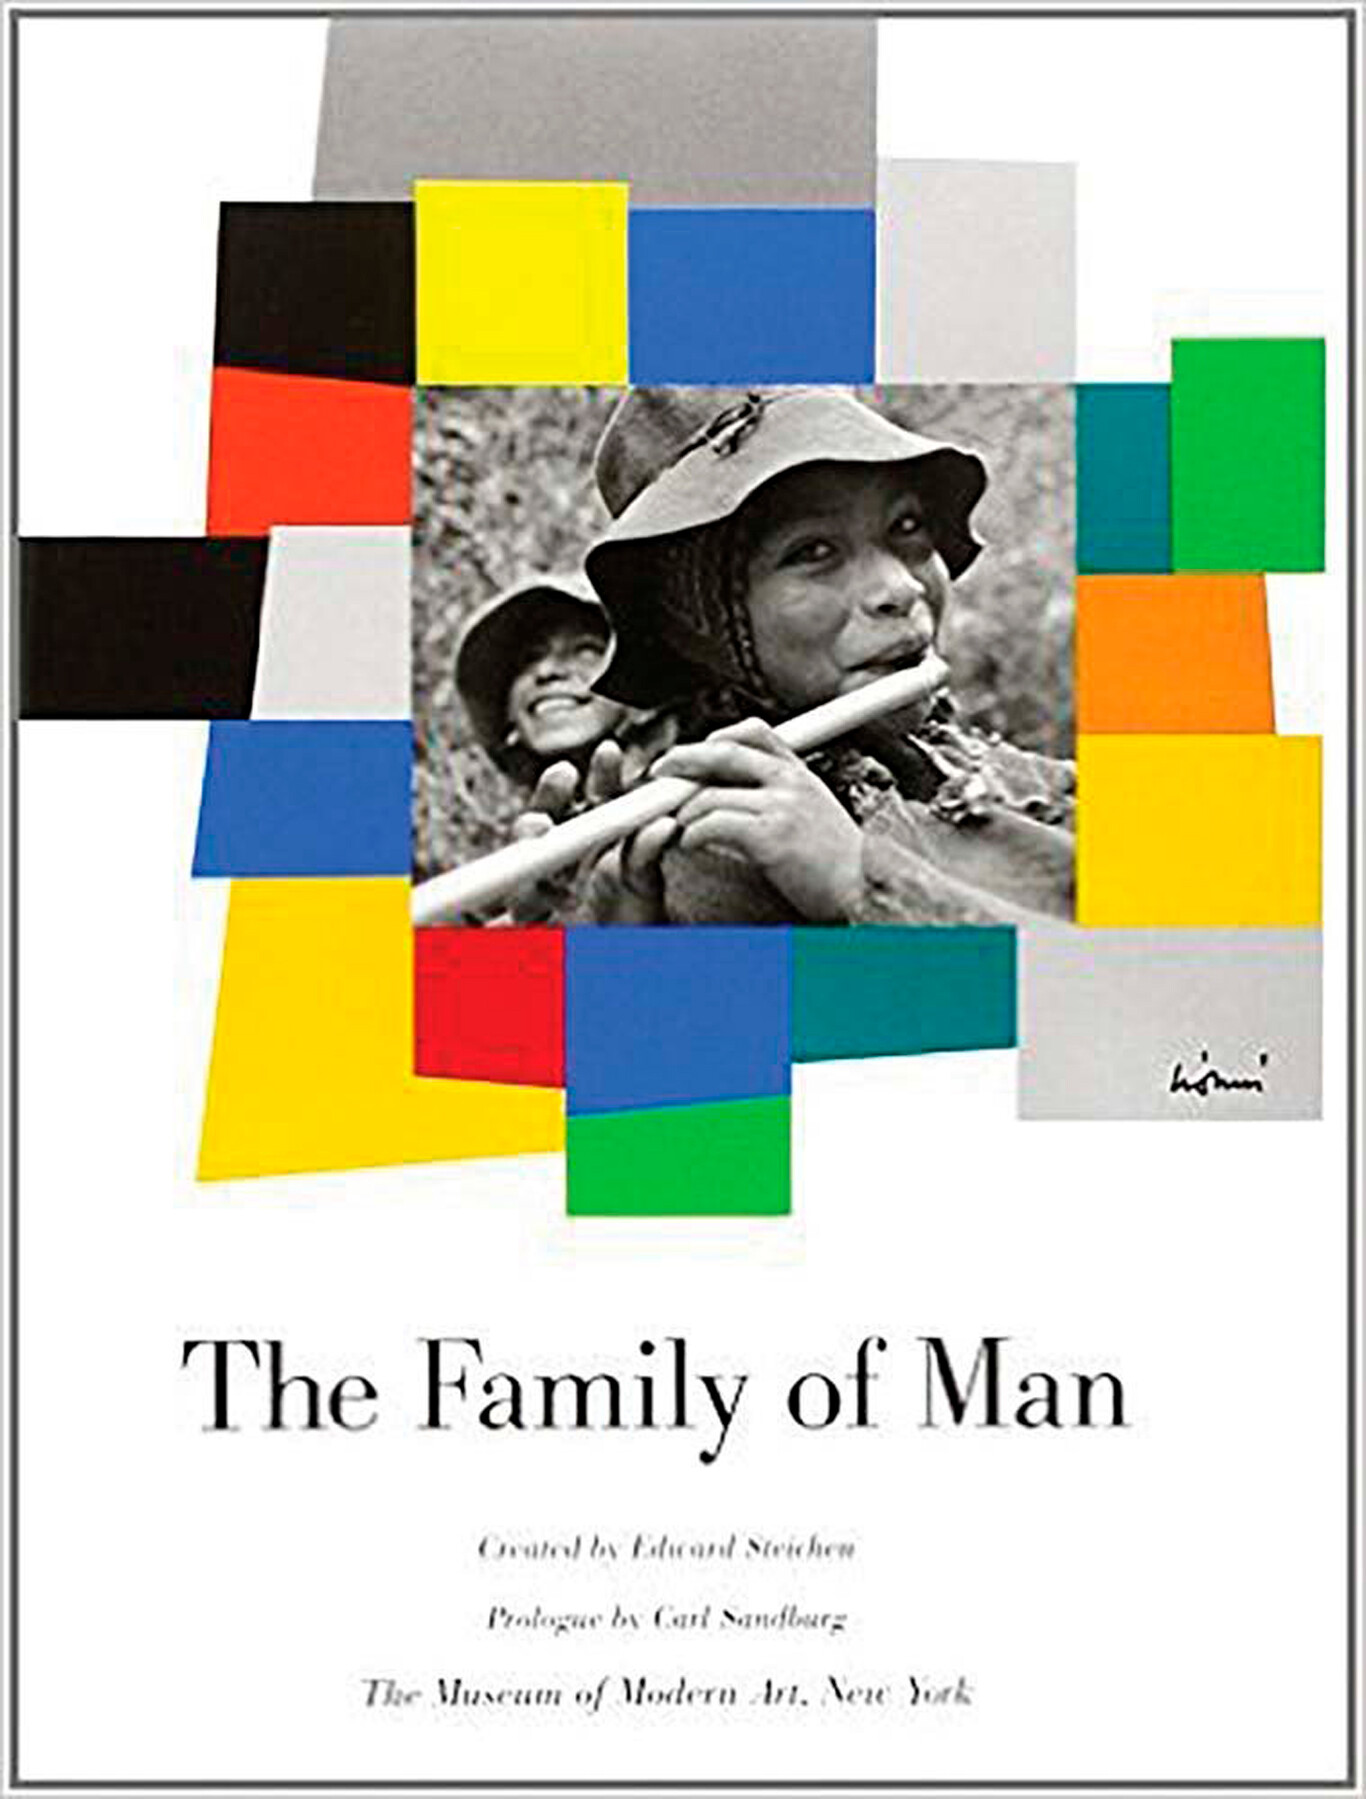 'The Family of Man' by Edward Steichen